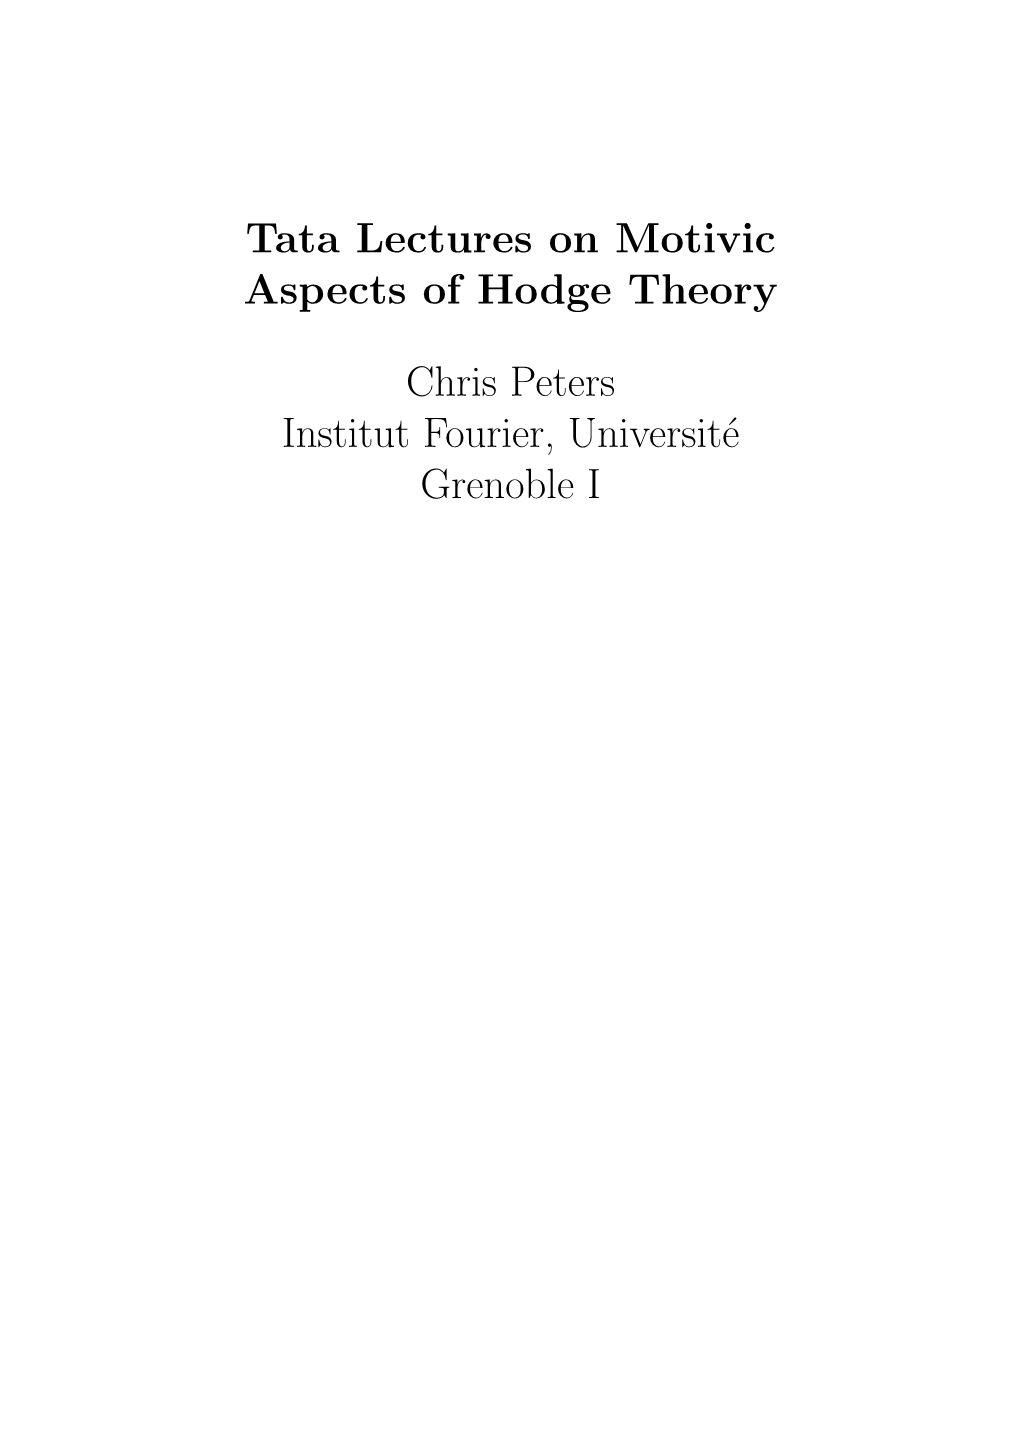 Tata Lectures on Motivic Aspects of Hodge Theory Chris Peters Institut